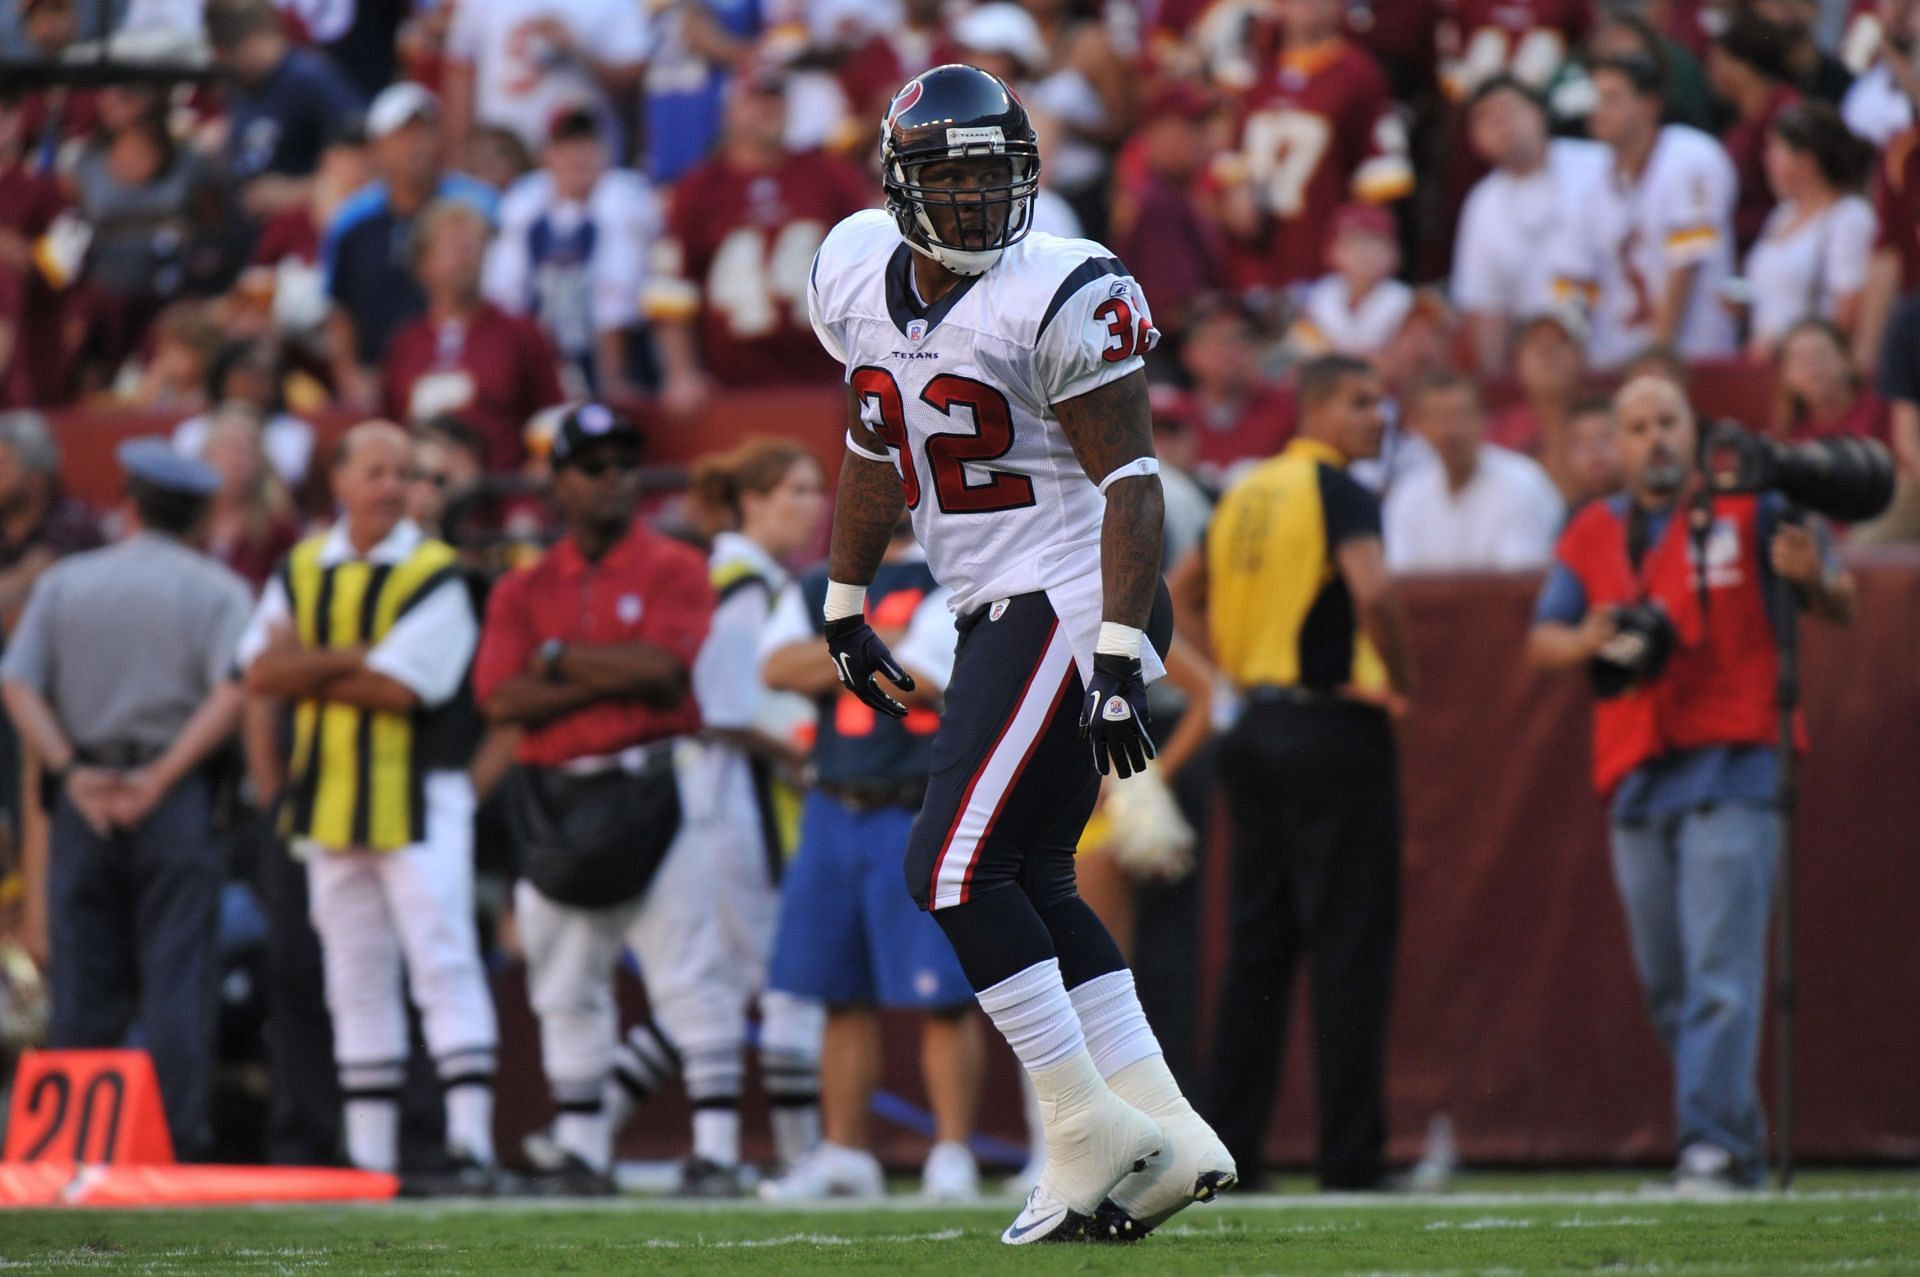 Derrick Ward also played for the Houston Texans